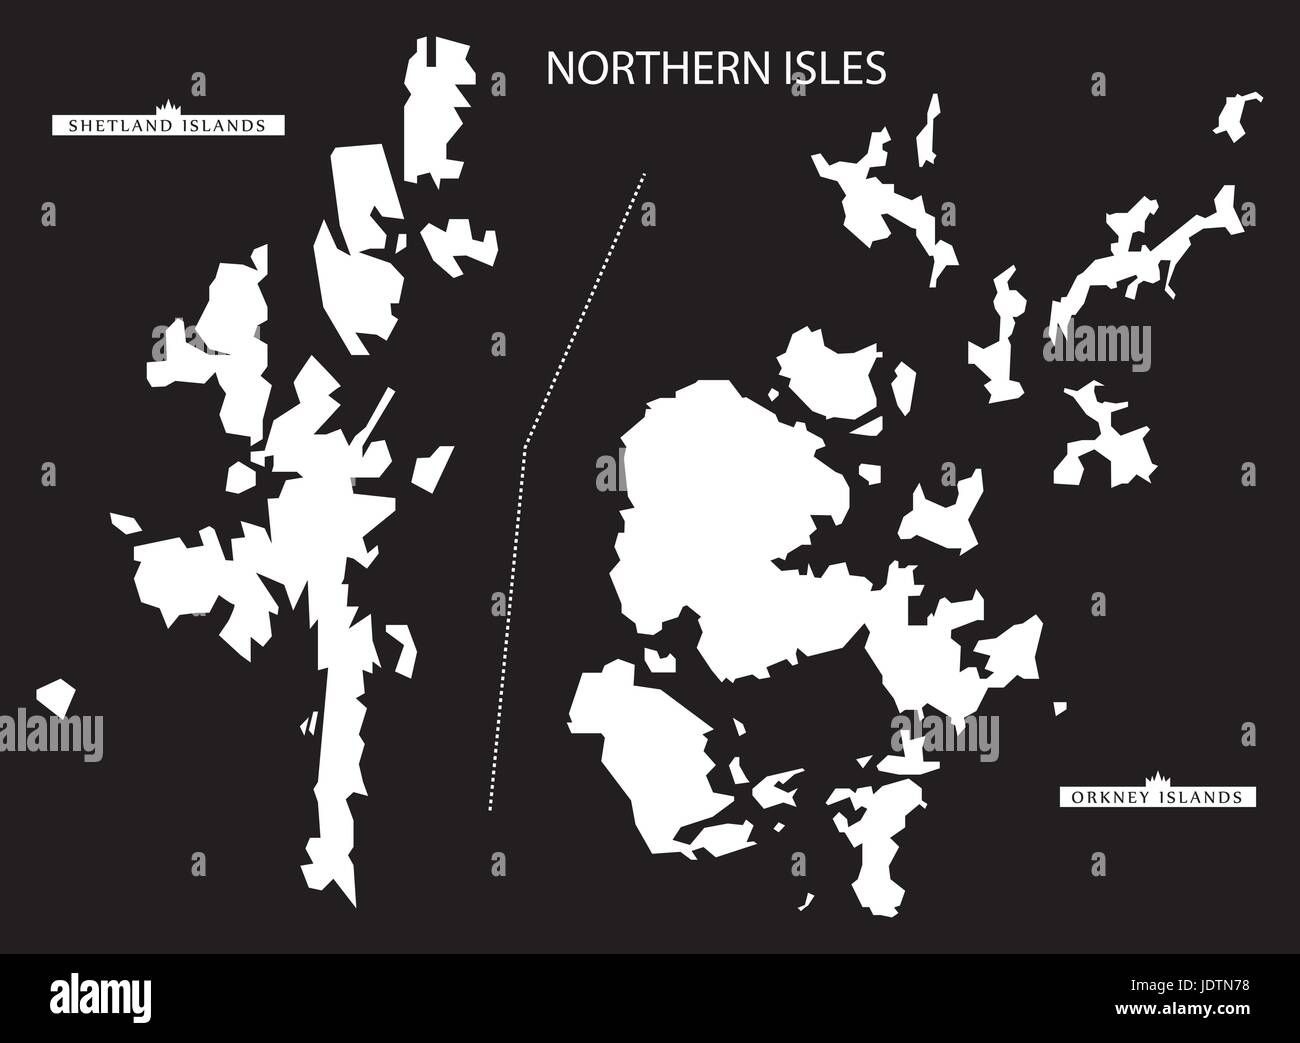 Northern Isles of Scotland map black inverted silhouette illustration Stock Vector